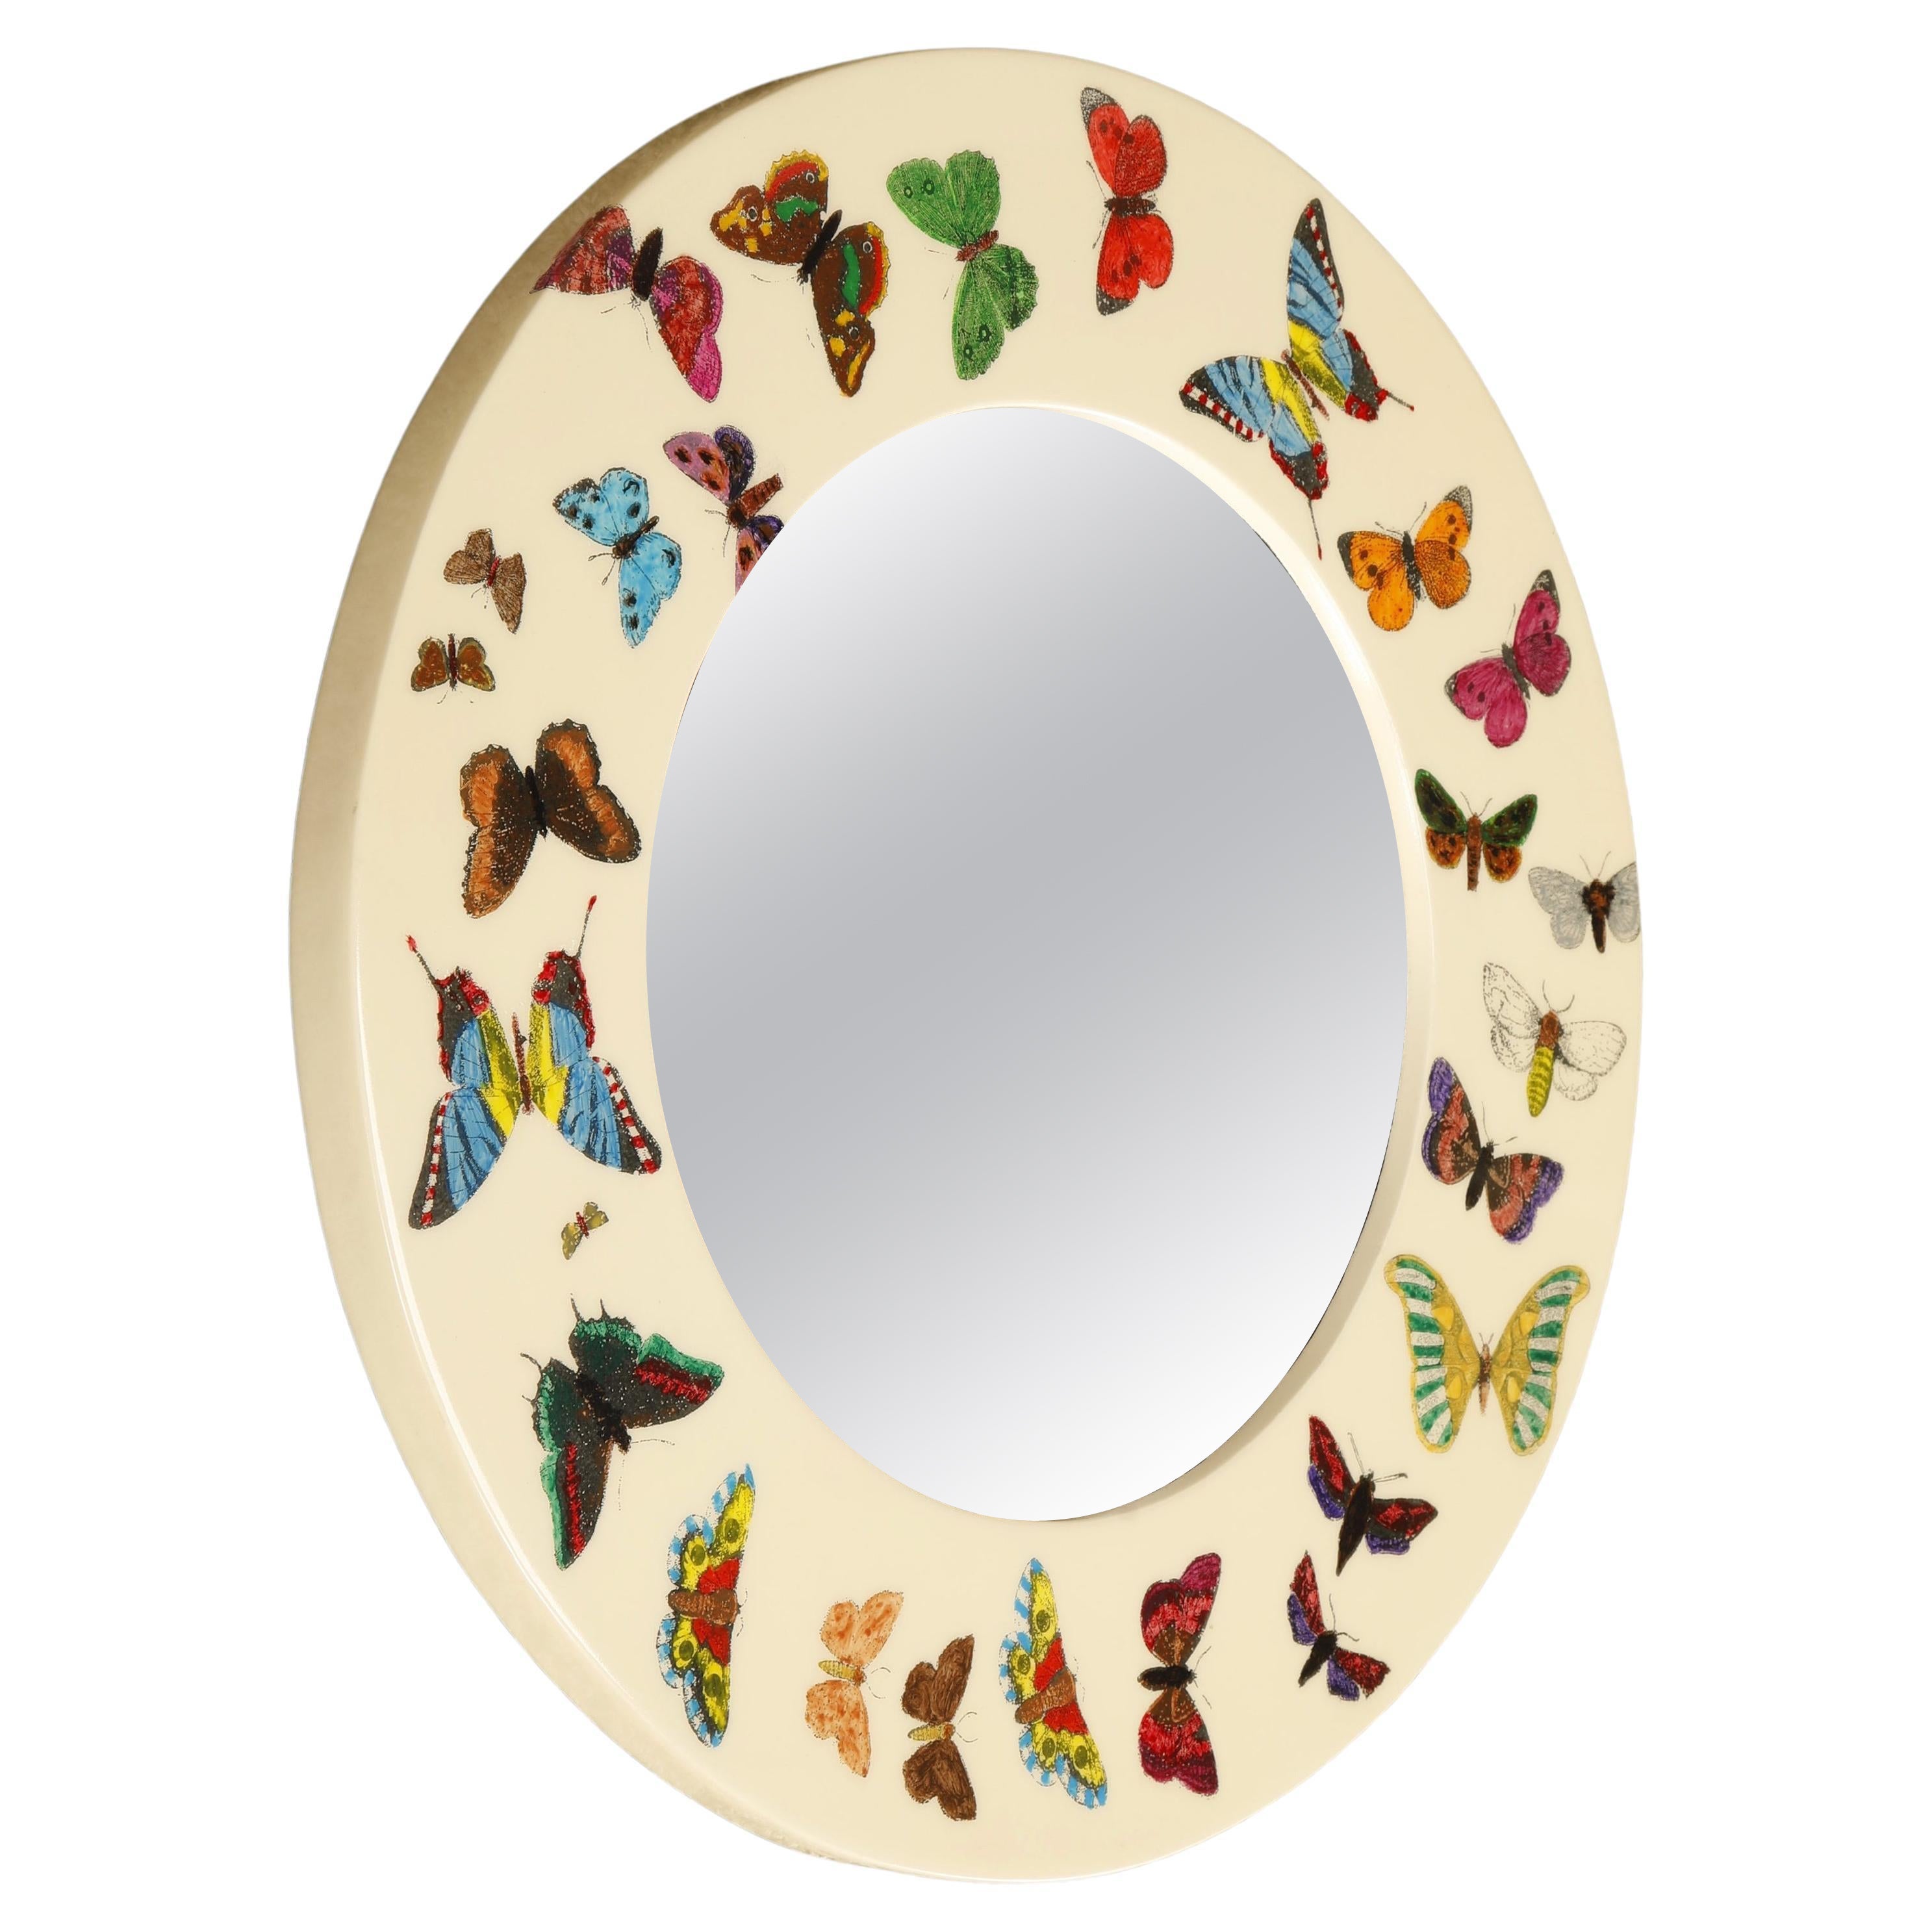 'Butterflies'' Round Mirror by Piero Fornasetti, Signed 